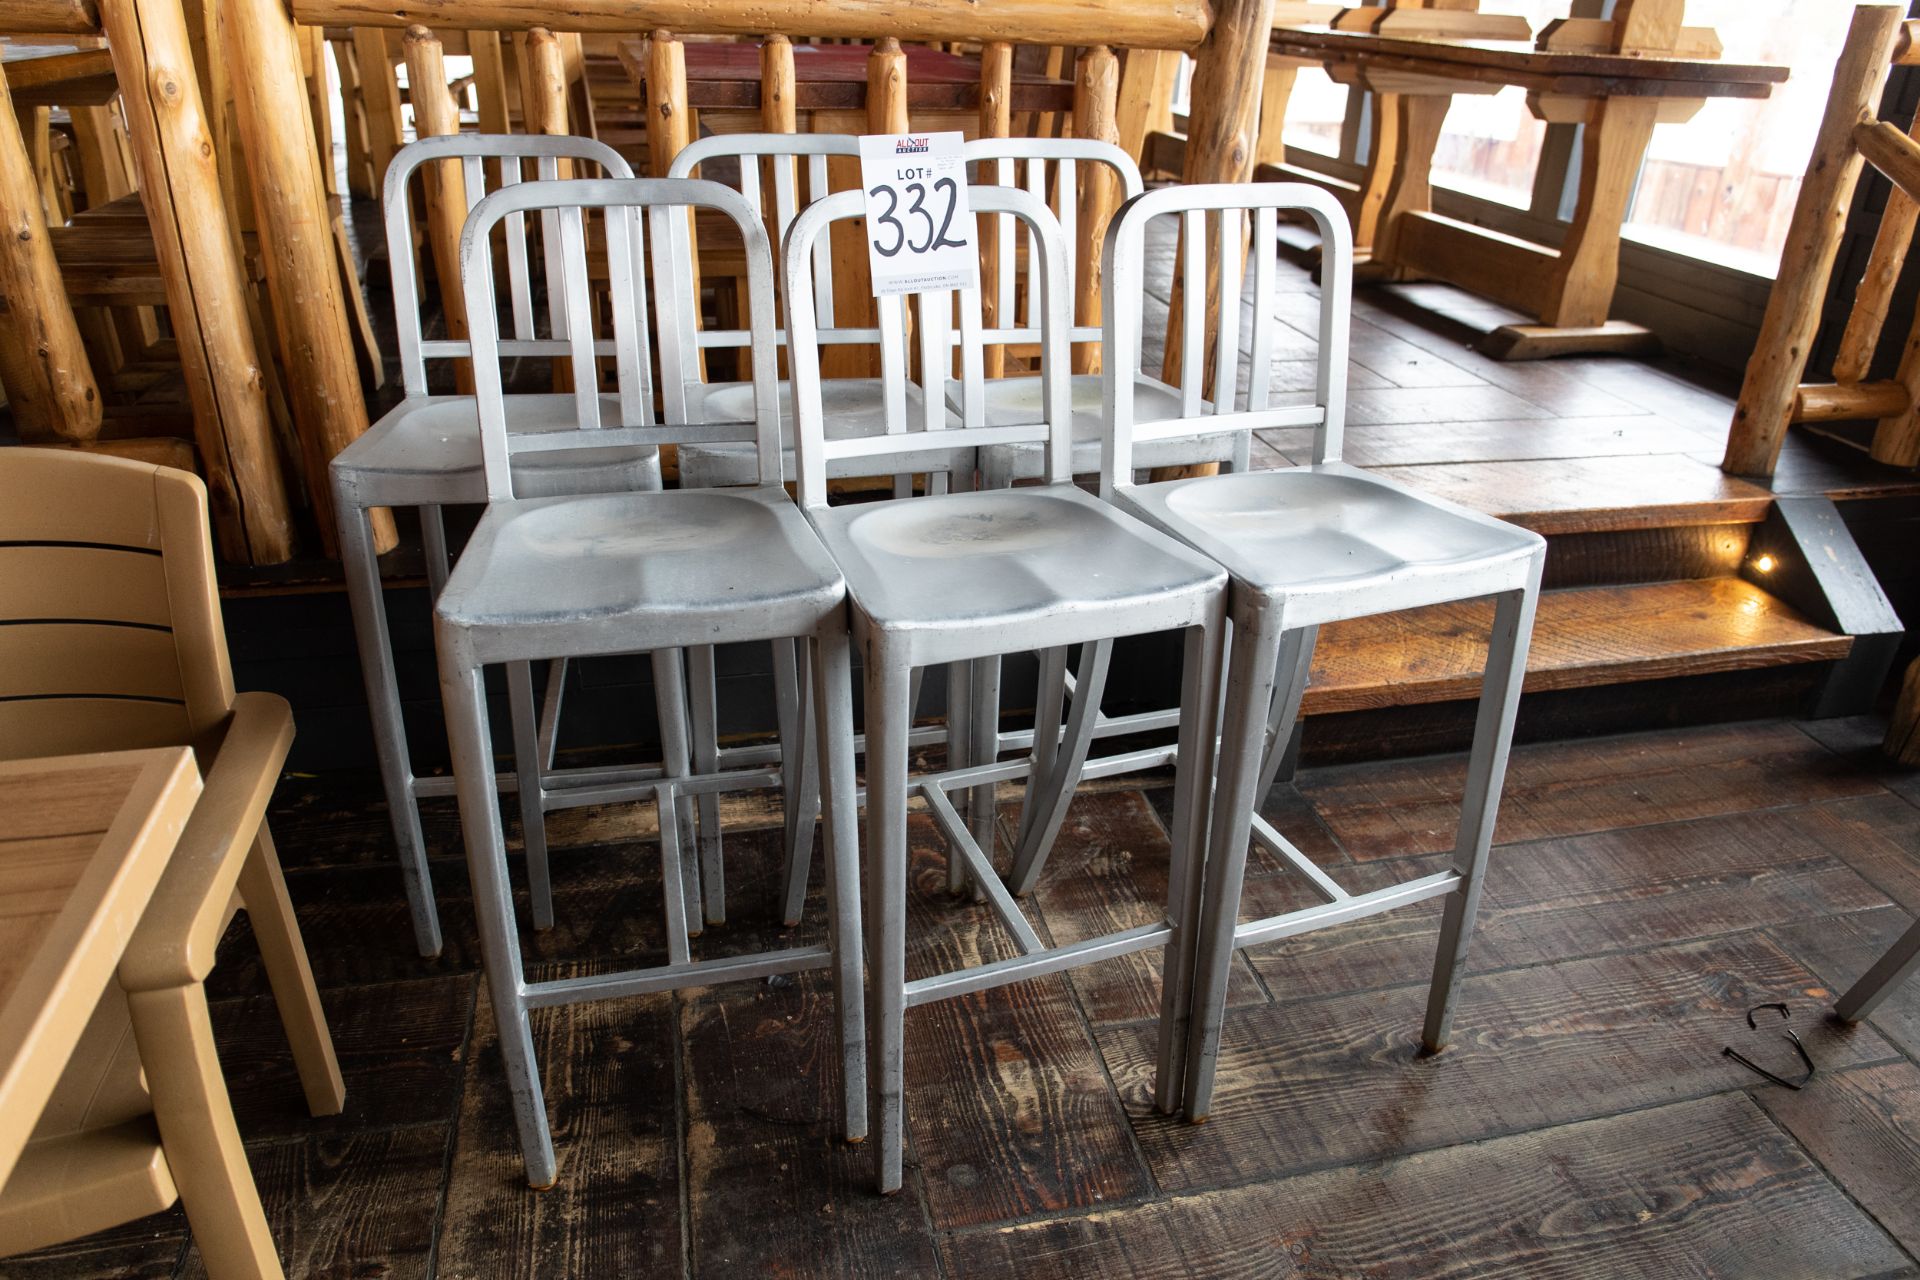 6 SILVER BAR STOOLS WITH BACKS - SEAT-29" BACK 43"